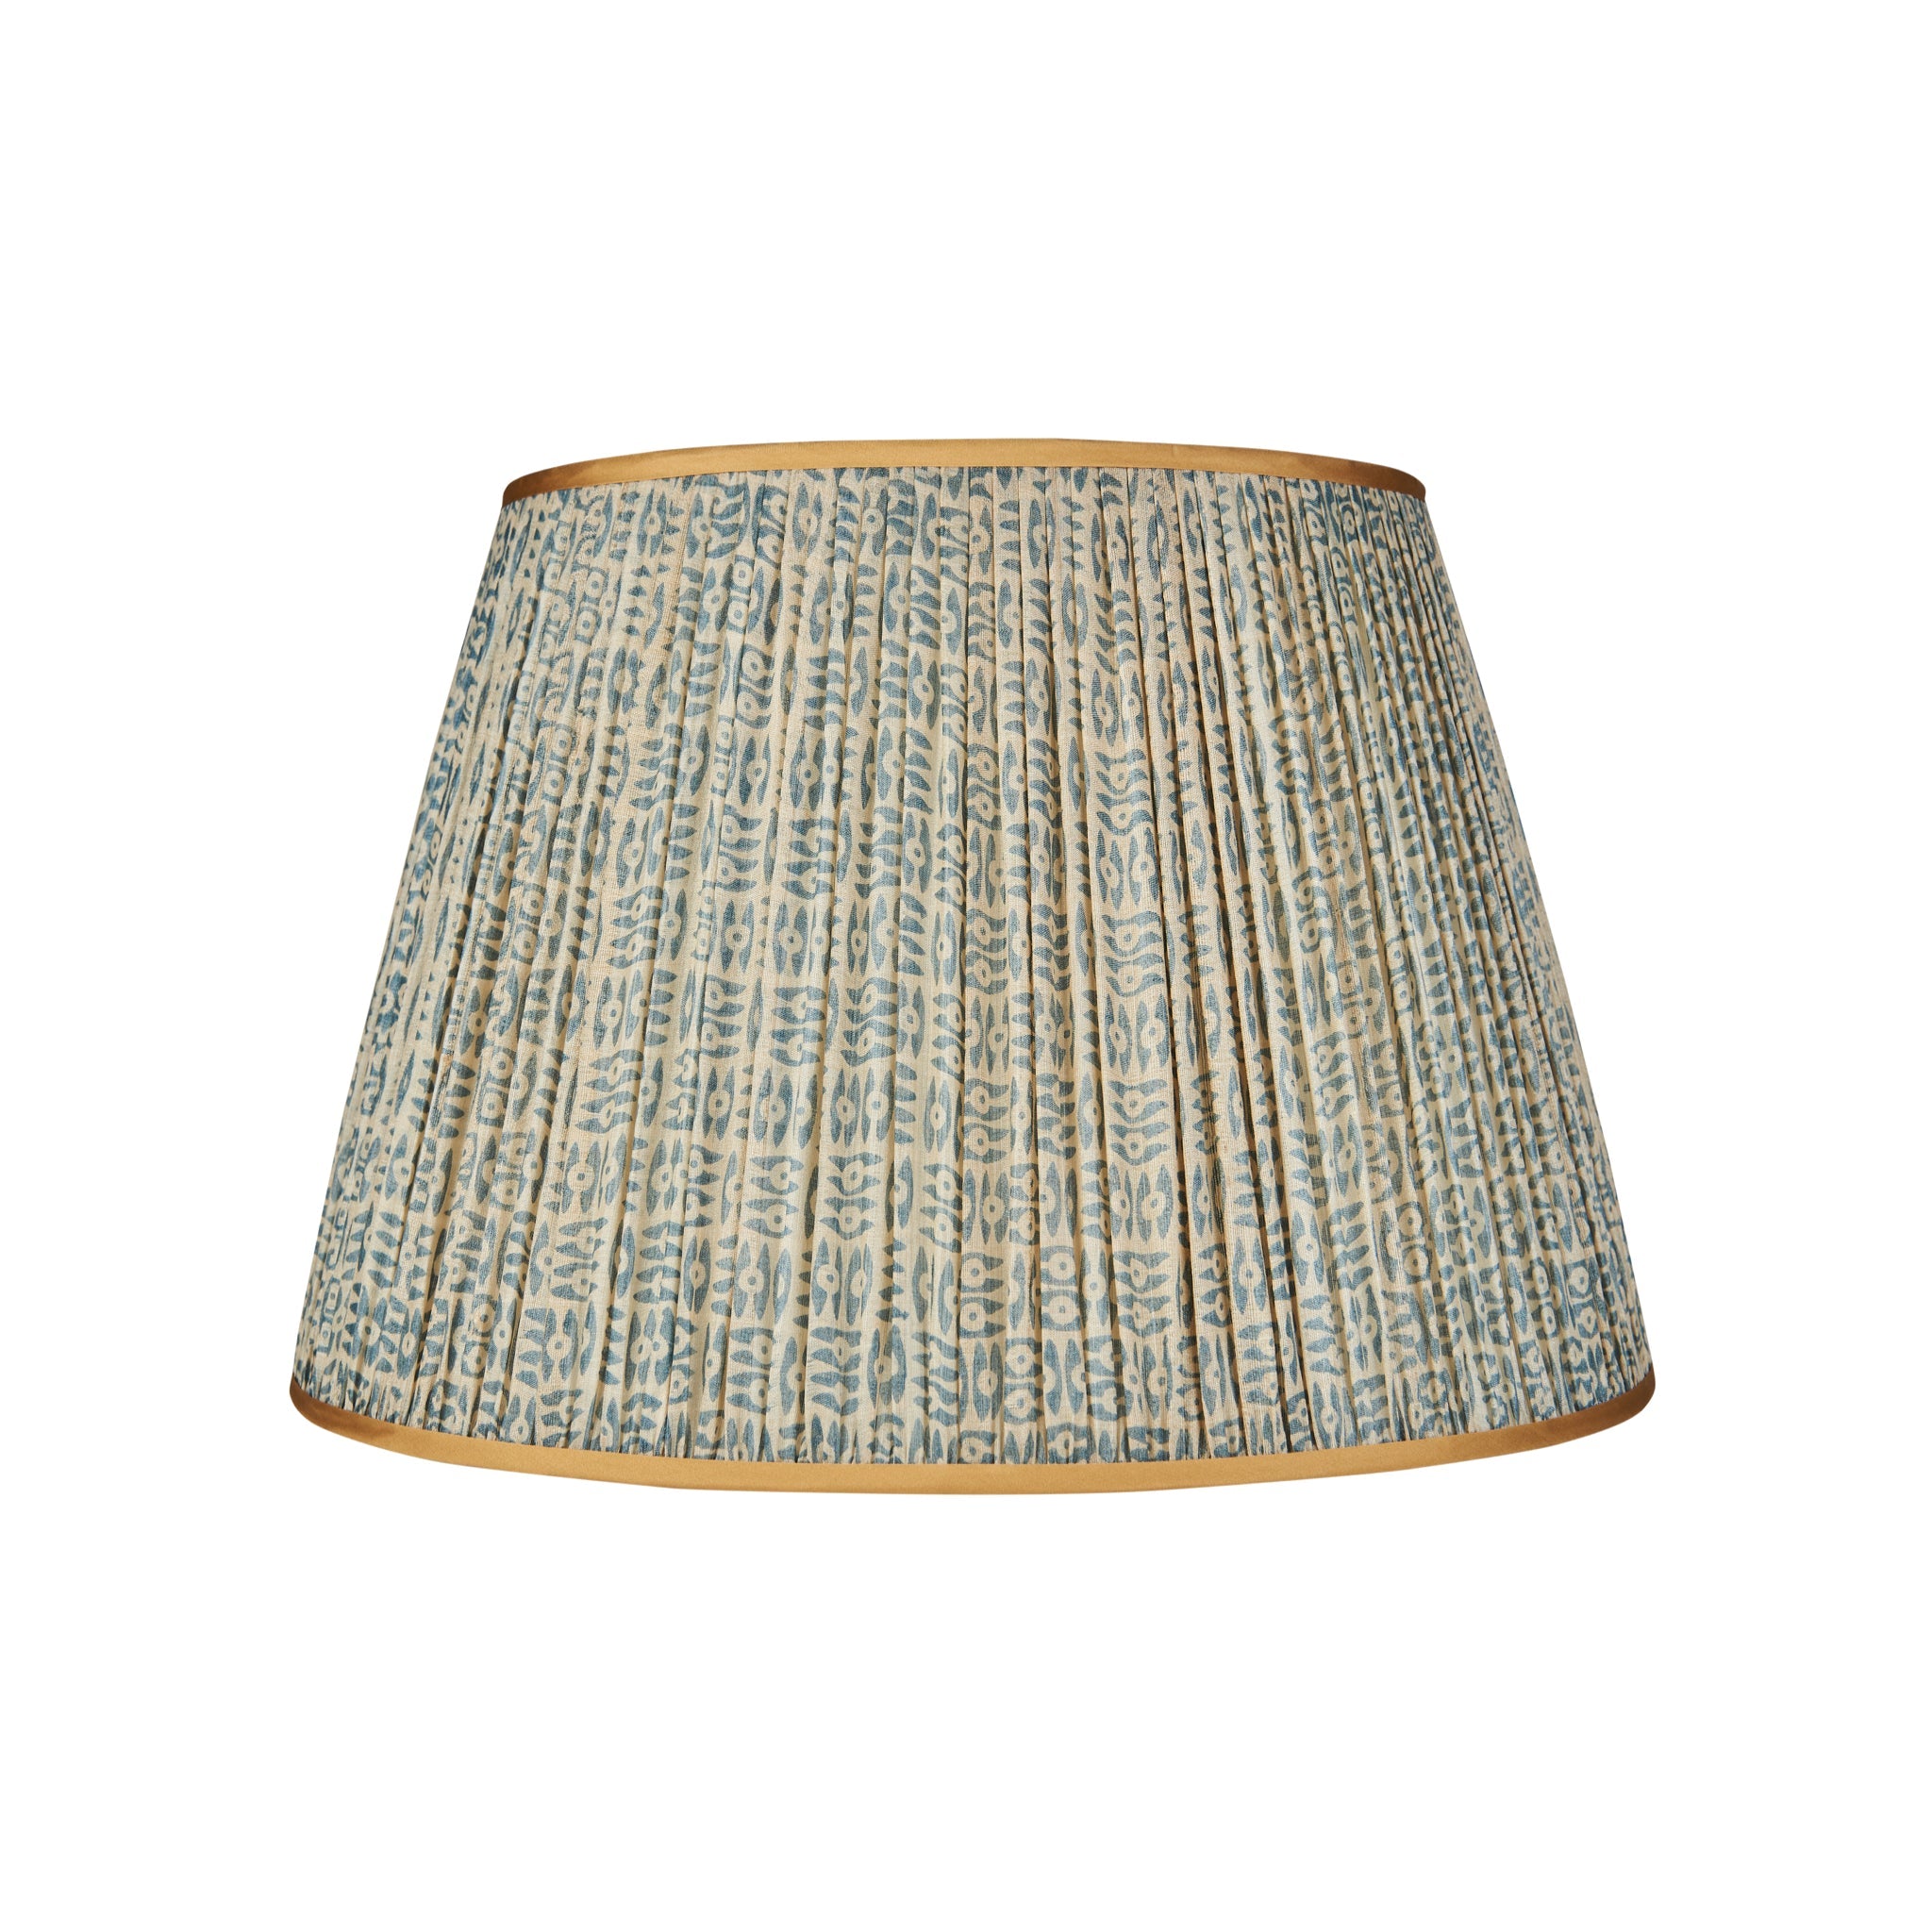 Inverted Blue and White Tribal Patterned Lampshade